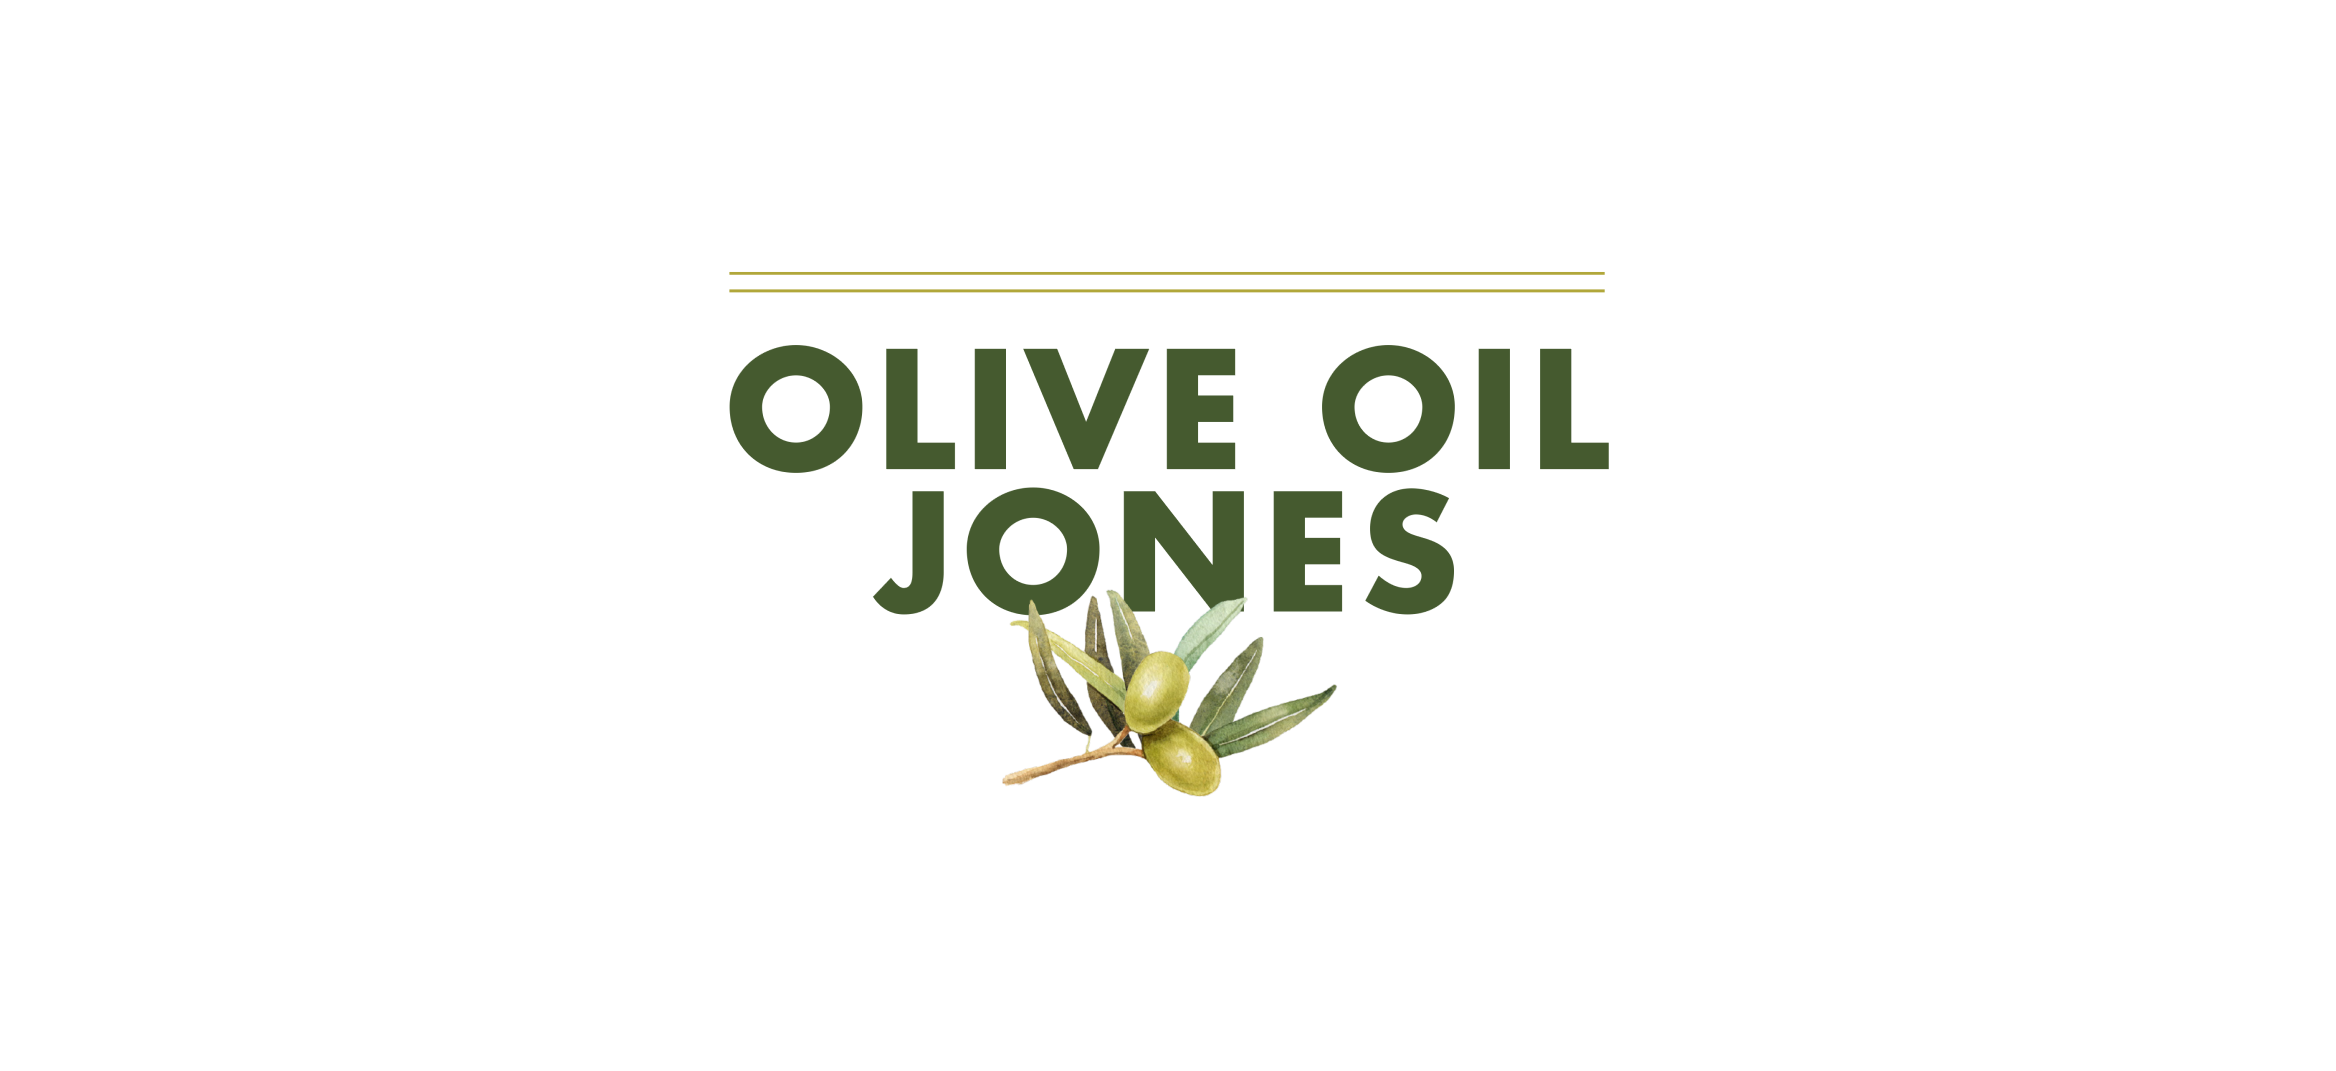 The Finest Oils and Vinegars in the World - Olive Oil Jones